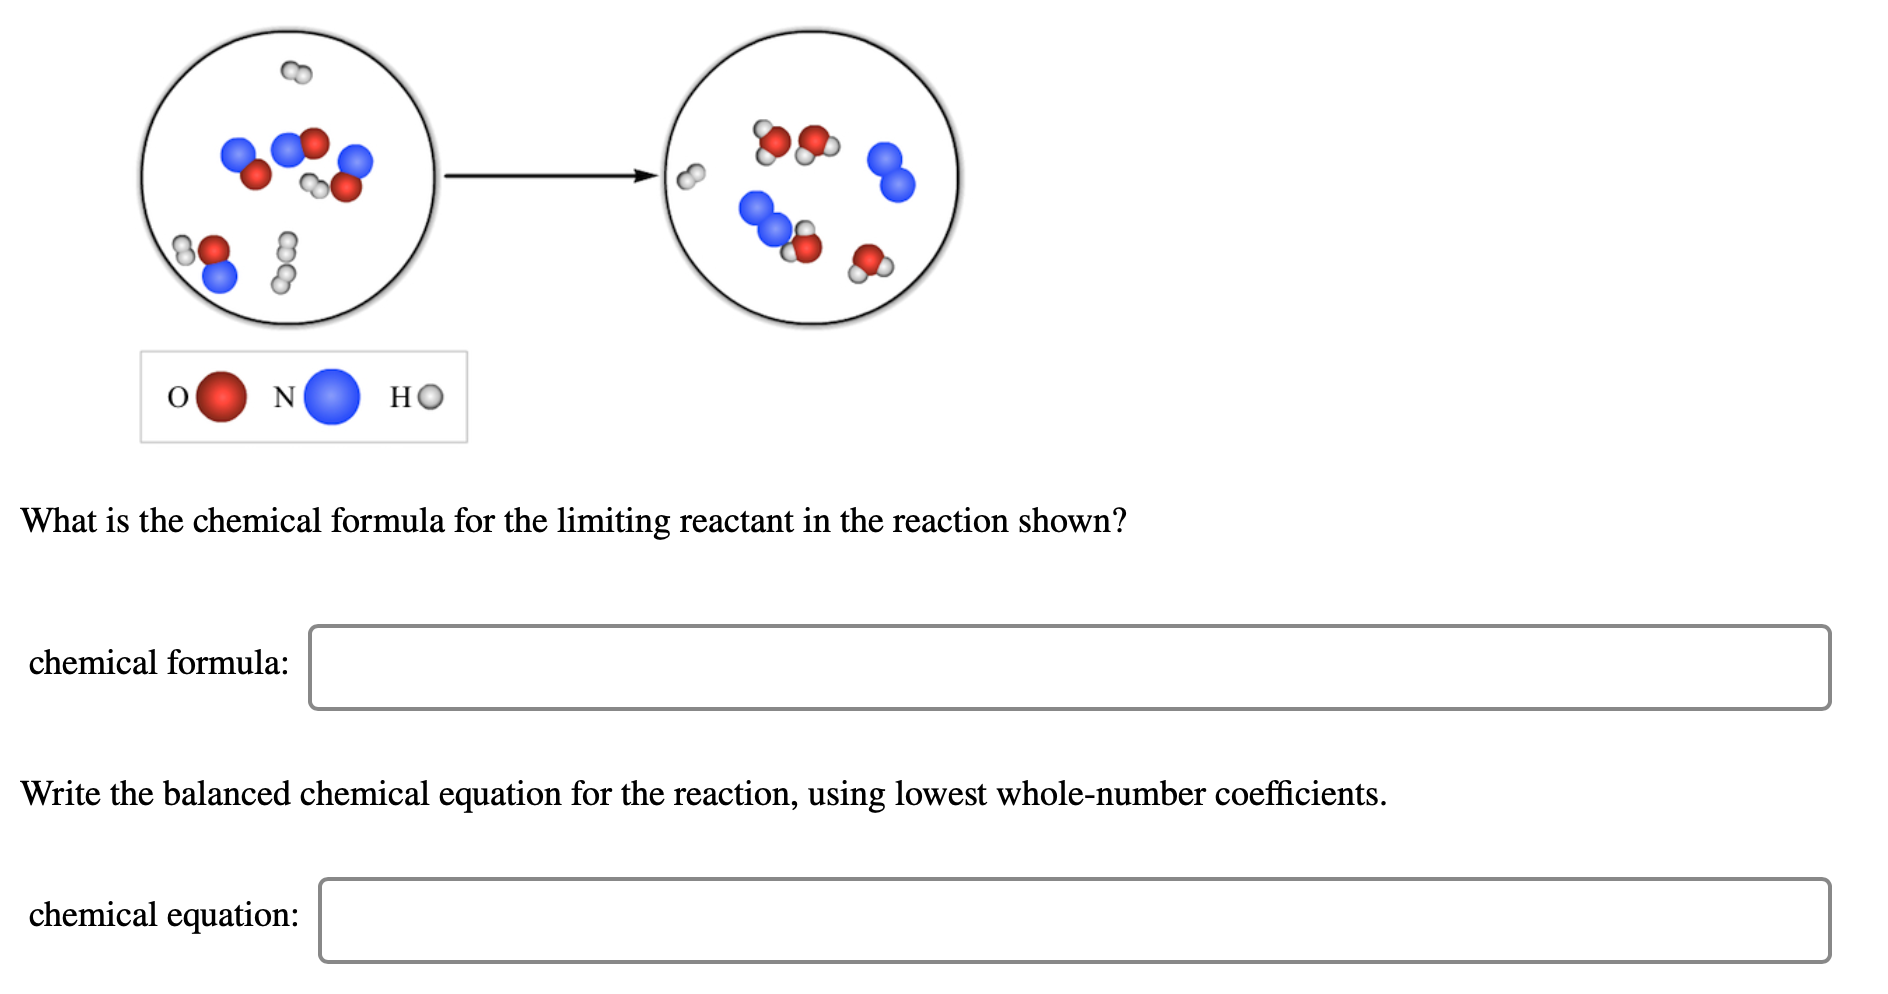 HO
What is the chemical formula for the limiting reactant in the reaction shown?
chemical formula
Write the balanced chemical equation for the reaction, using lowest whole-number coefficients
chemical equation:
